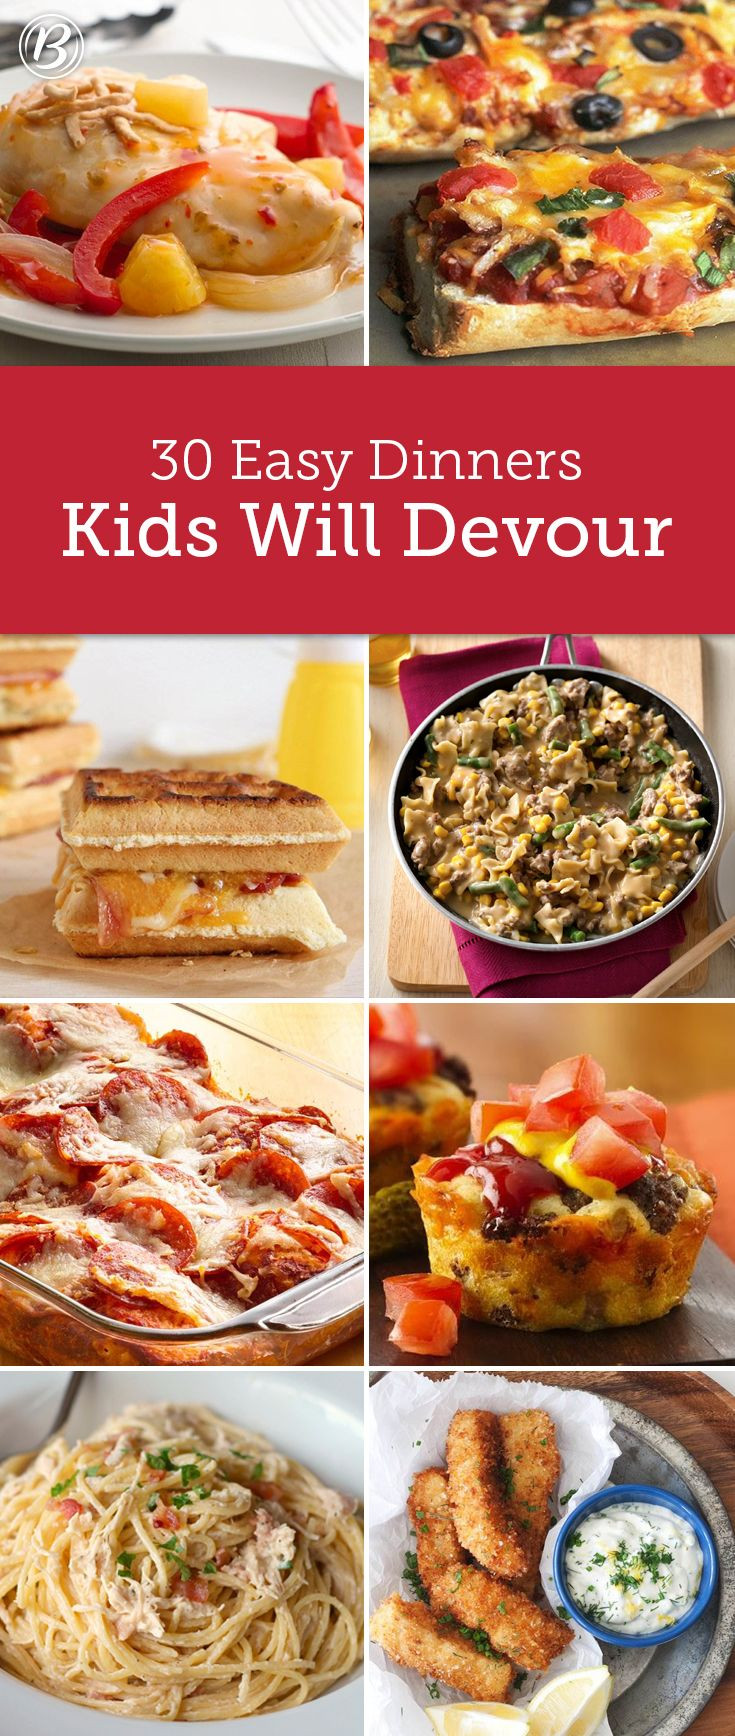 Kid Friendly Healthy Dinners
 Kids’ Most Requested Dinners